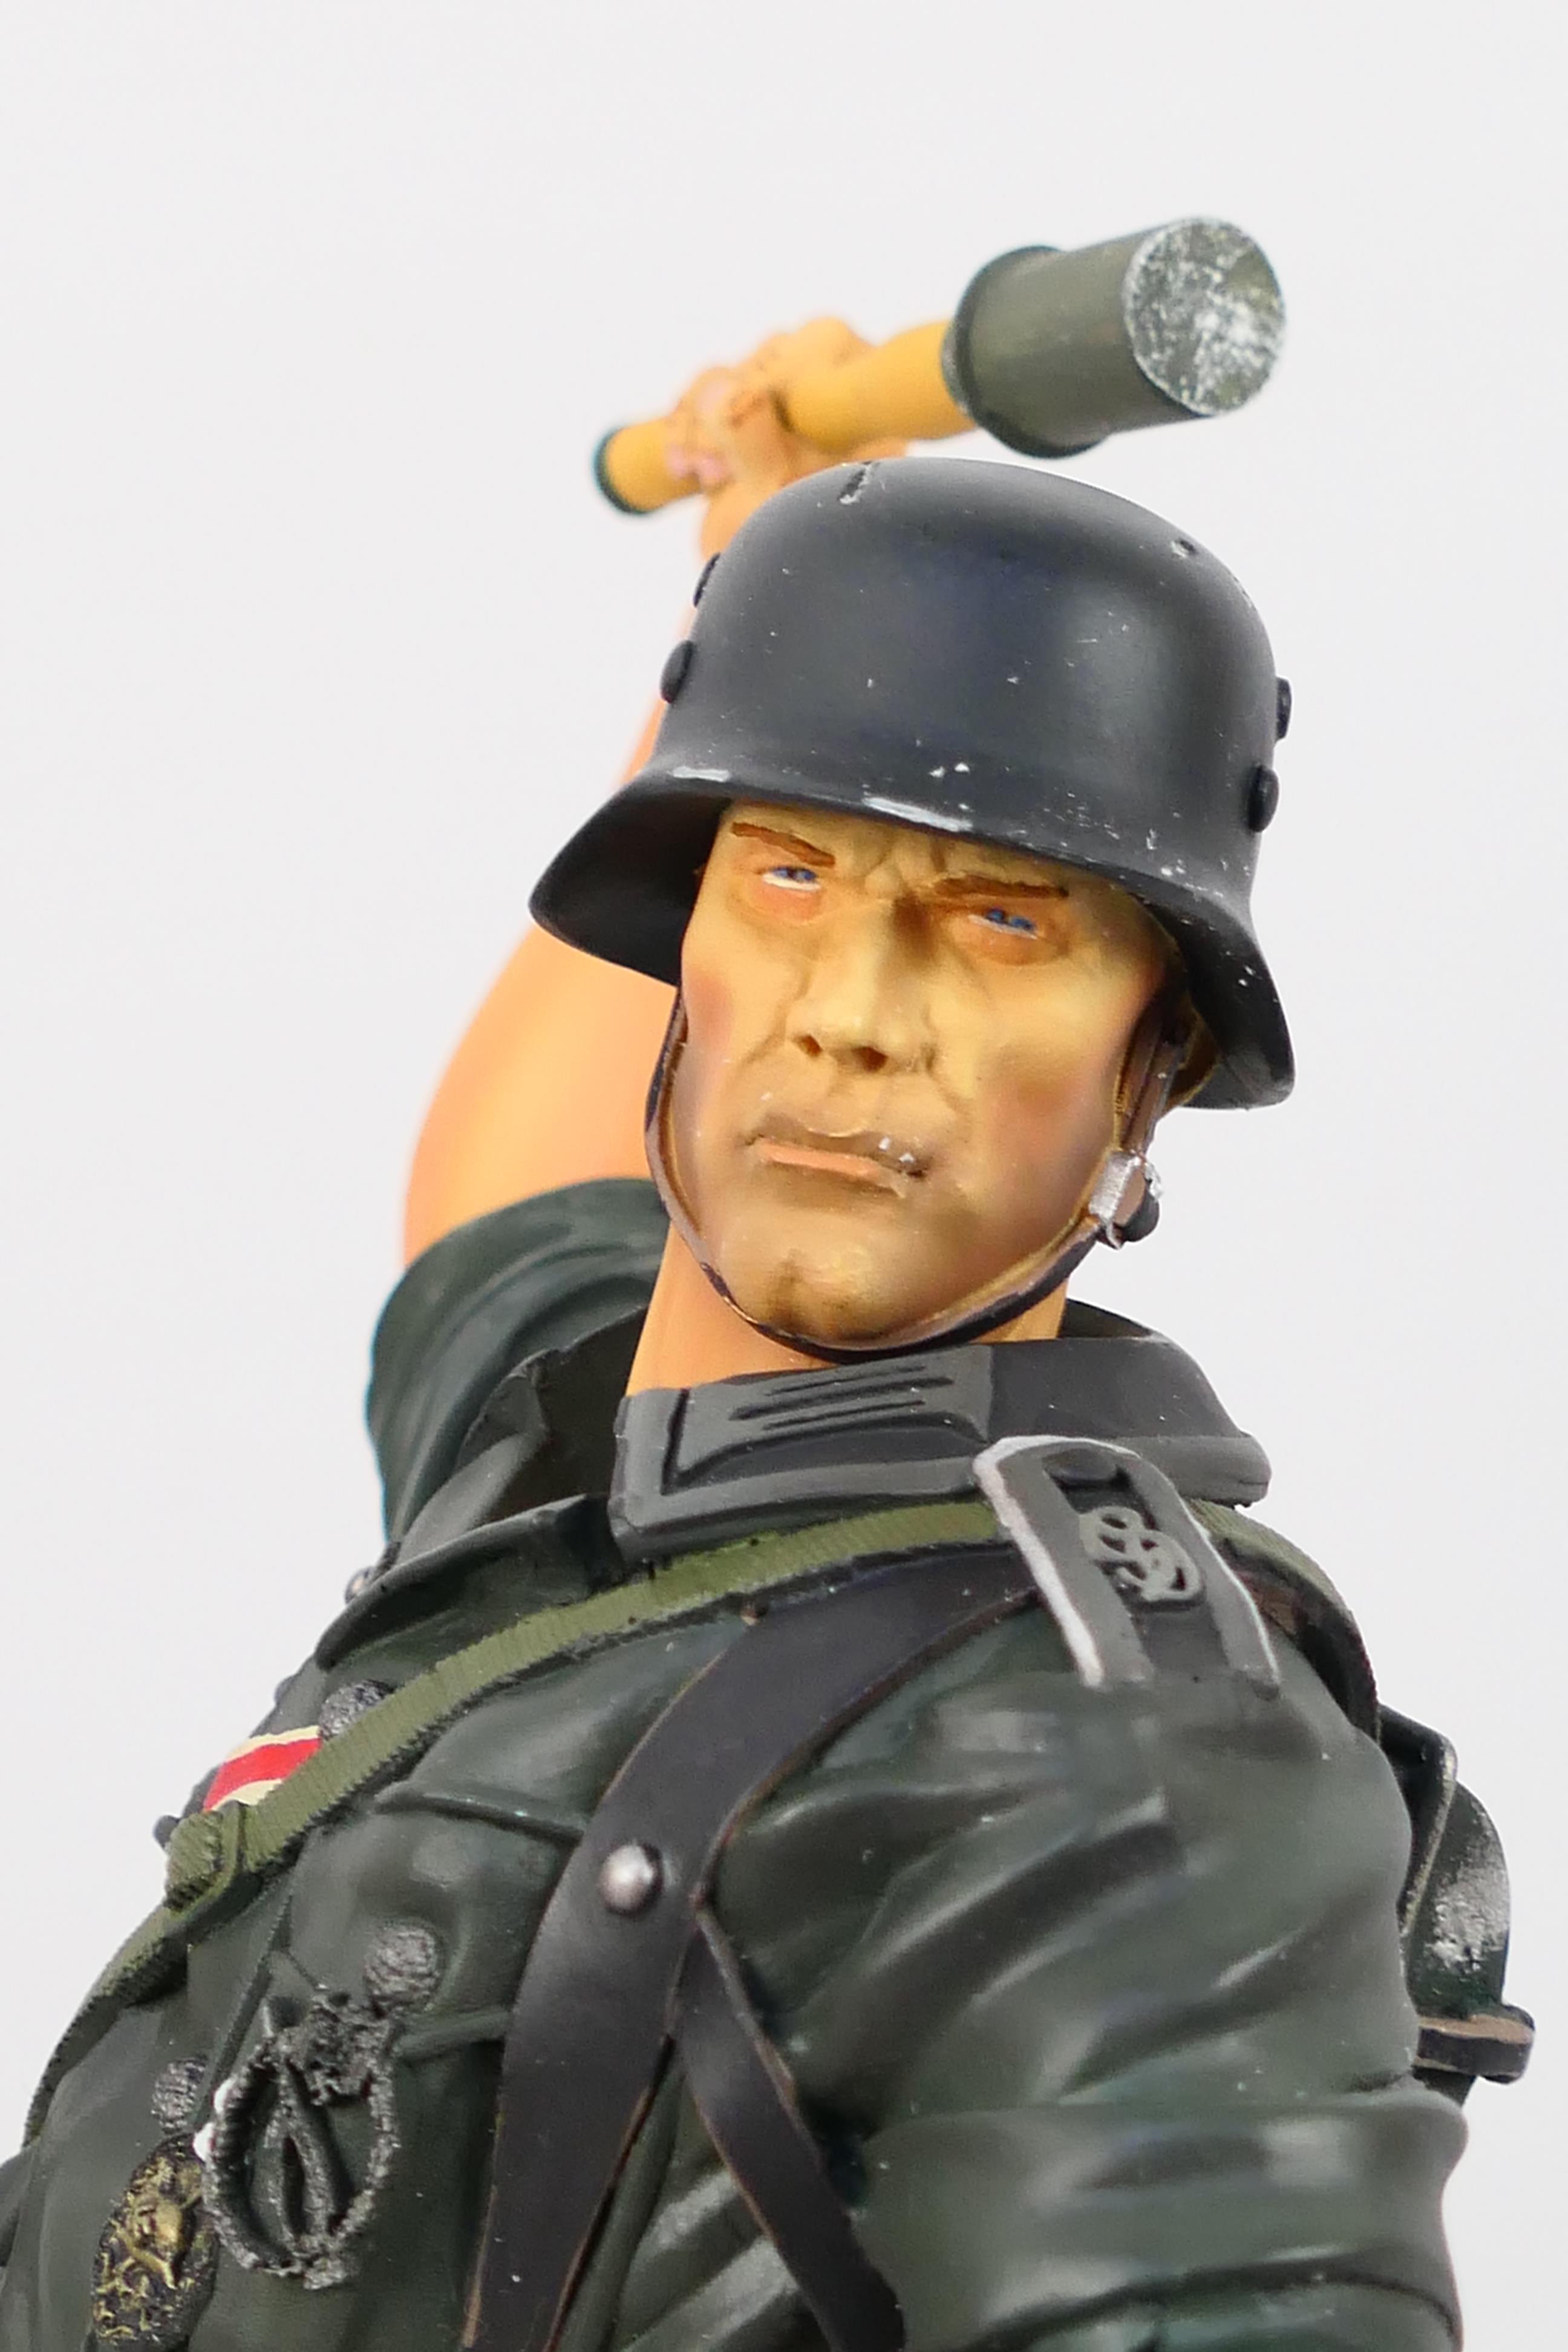 The Collectors Showcase - A boxed 1/6 scale limited edition German Grenadier 1941 figure # CS00280. - Image 5 of 8